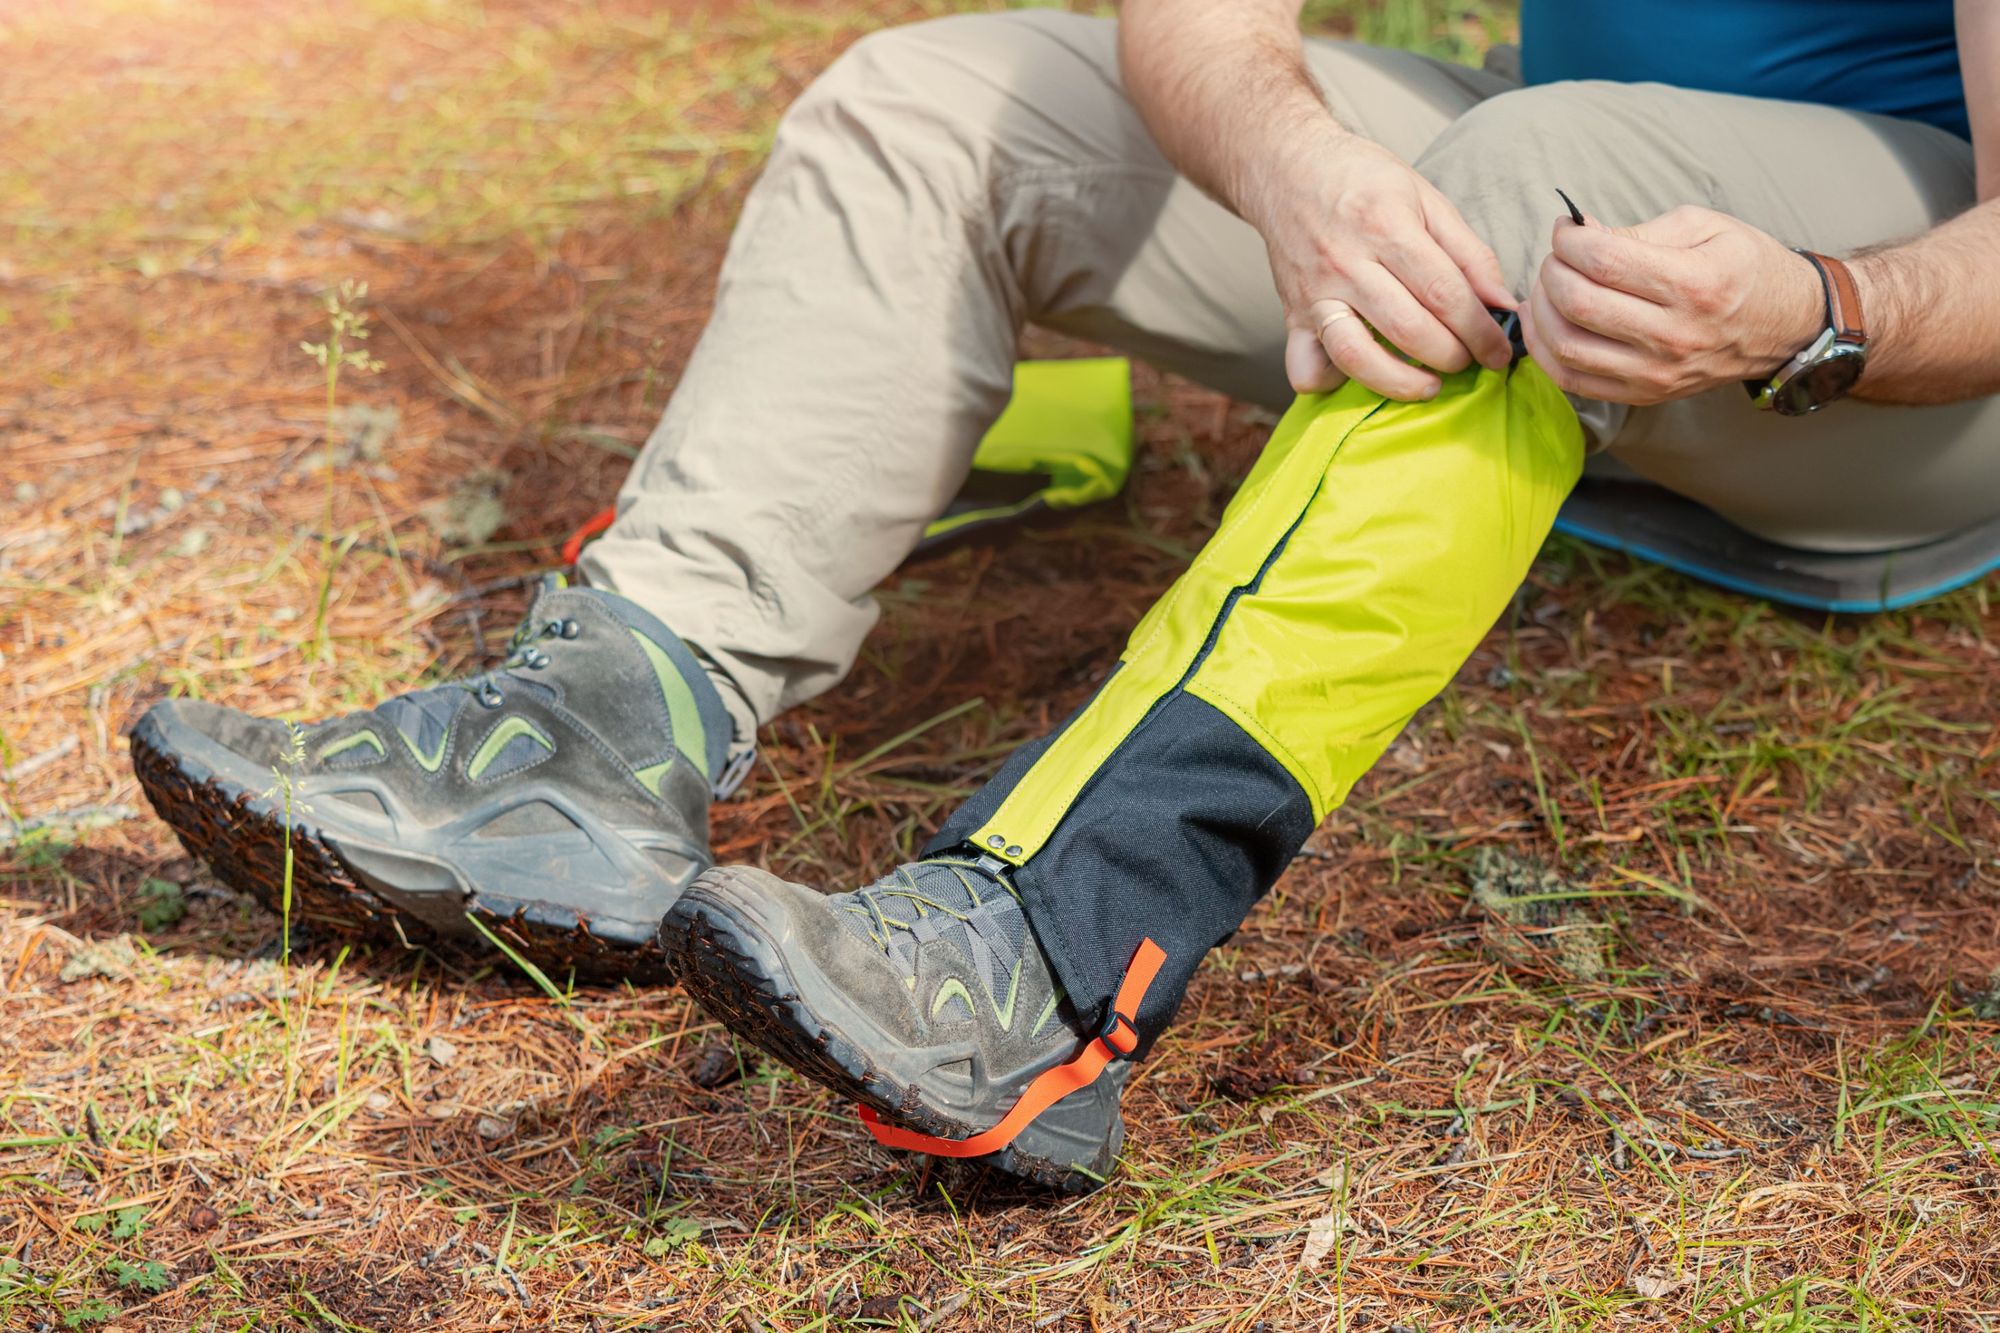 Strapping on gaiters can be a good way to help prevent getting tick bites, providing an extra layer of protection. Photo: Getty